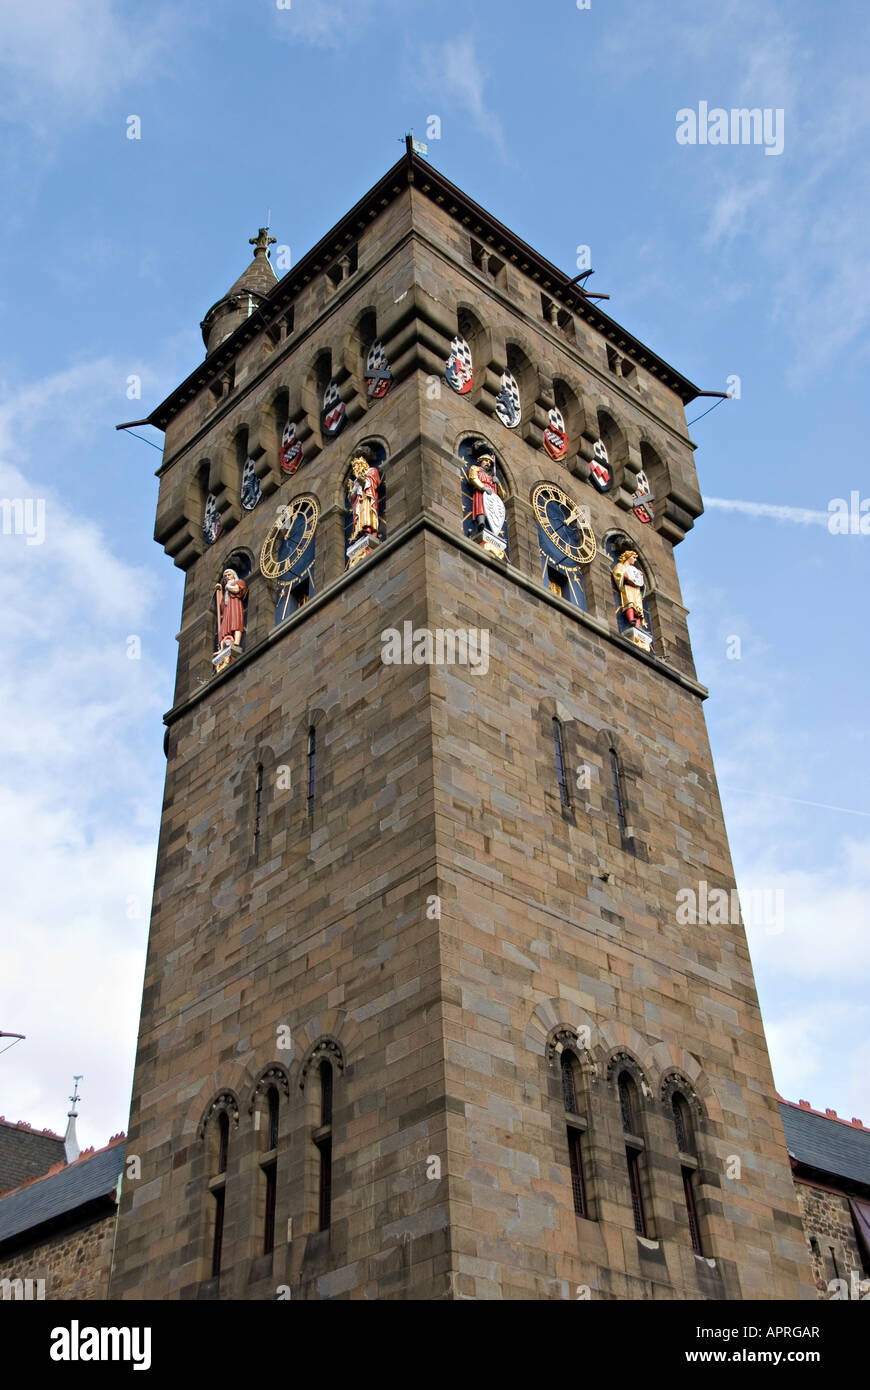 Cardiff Castle, Wales, UK. The Clock Tower, by William Burges, 1869 Stock Photo